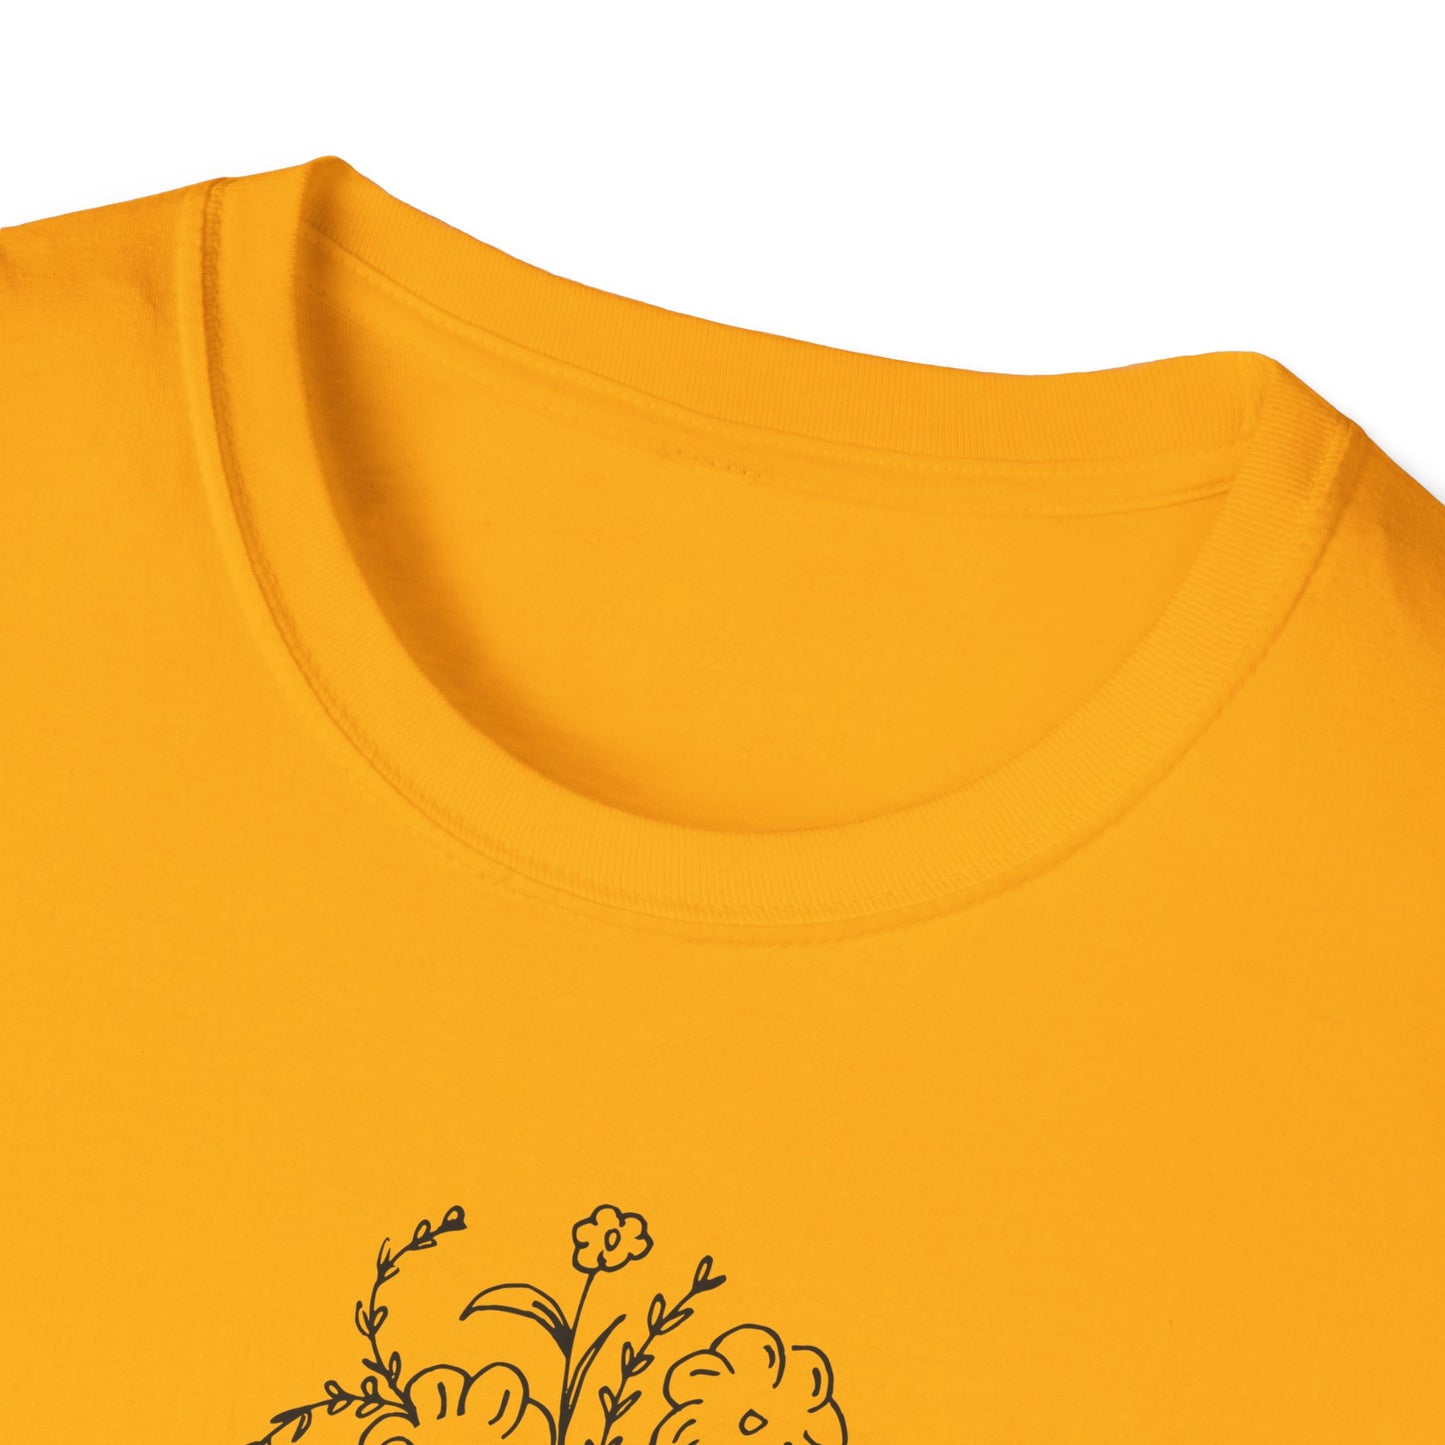 Blooming Thoughts - Unisex Softstyle T-Shirt